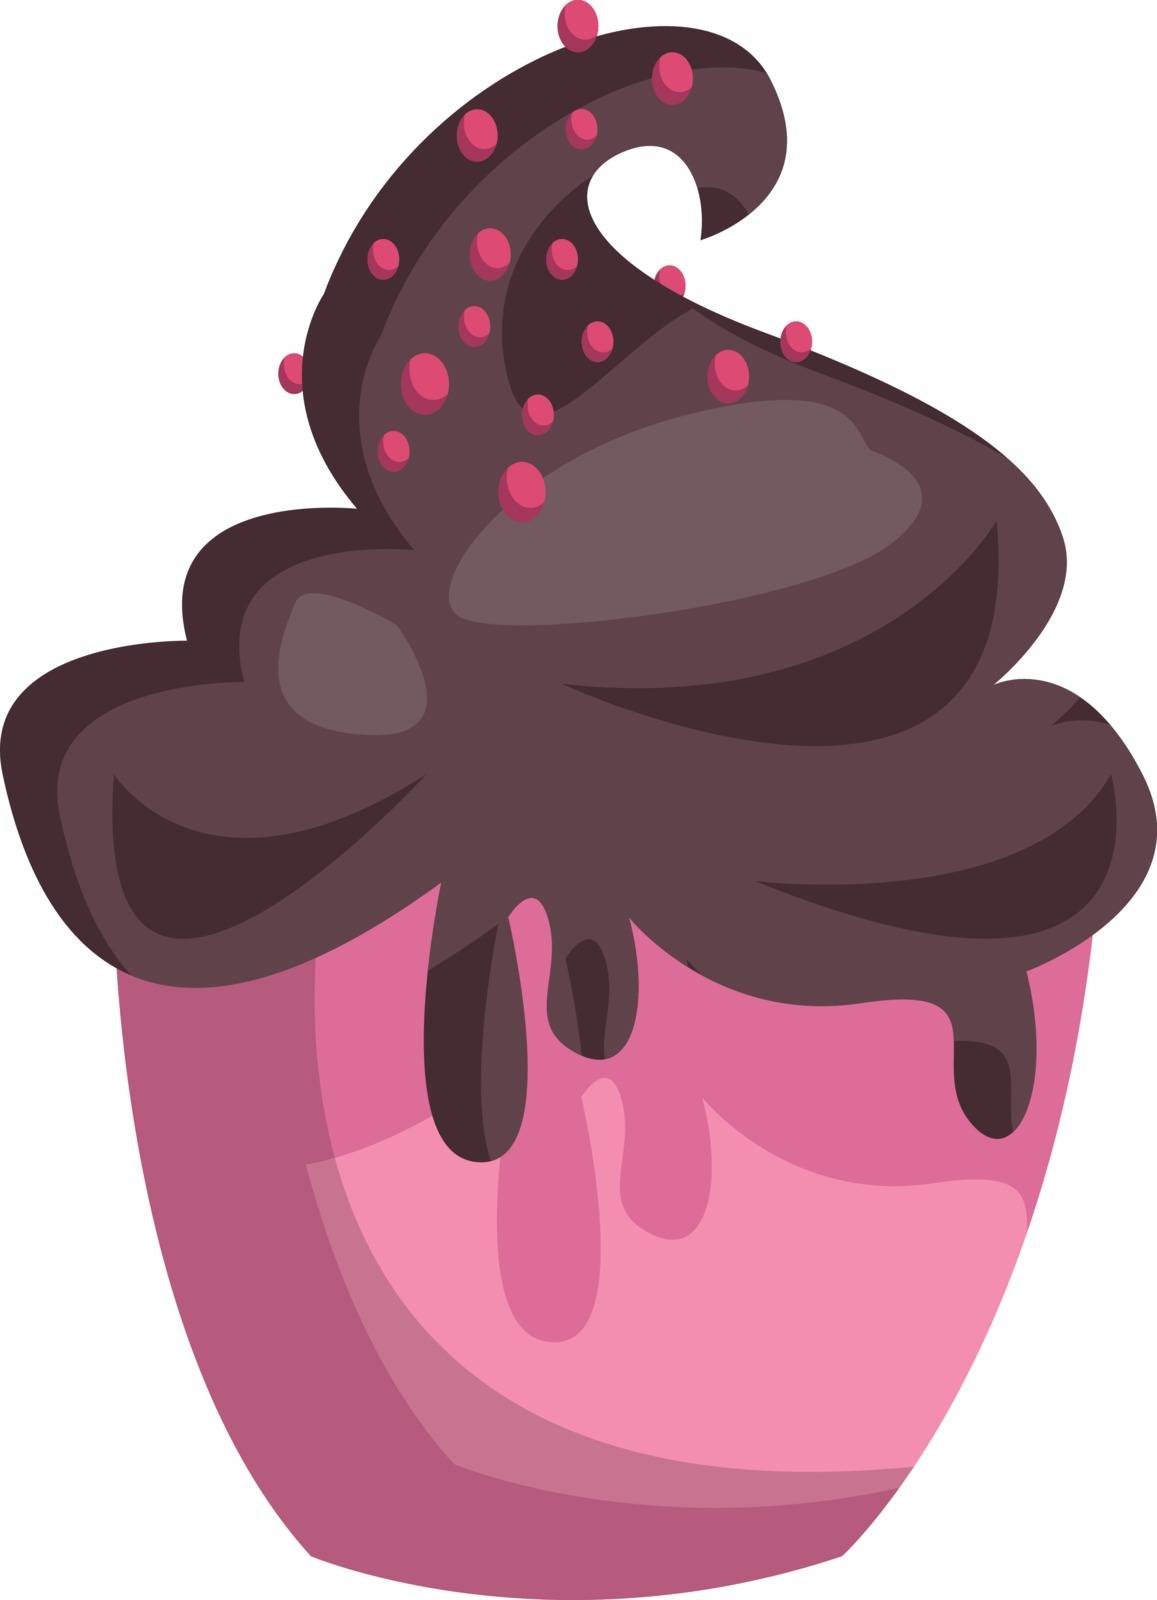 Pink icecream cup with choclate icecream and pink sprinkles on top vector illustration on white background.